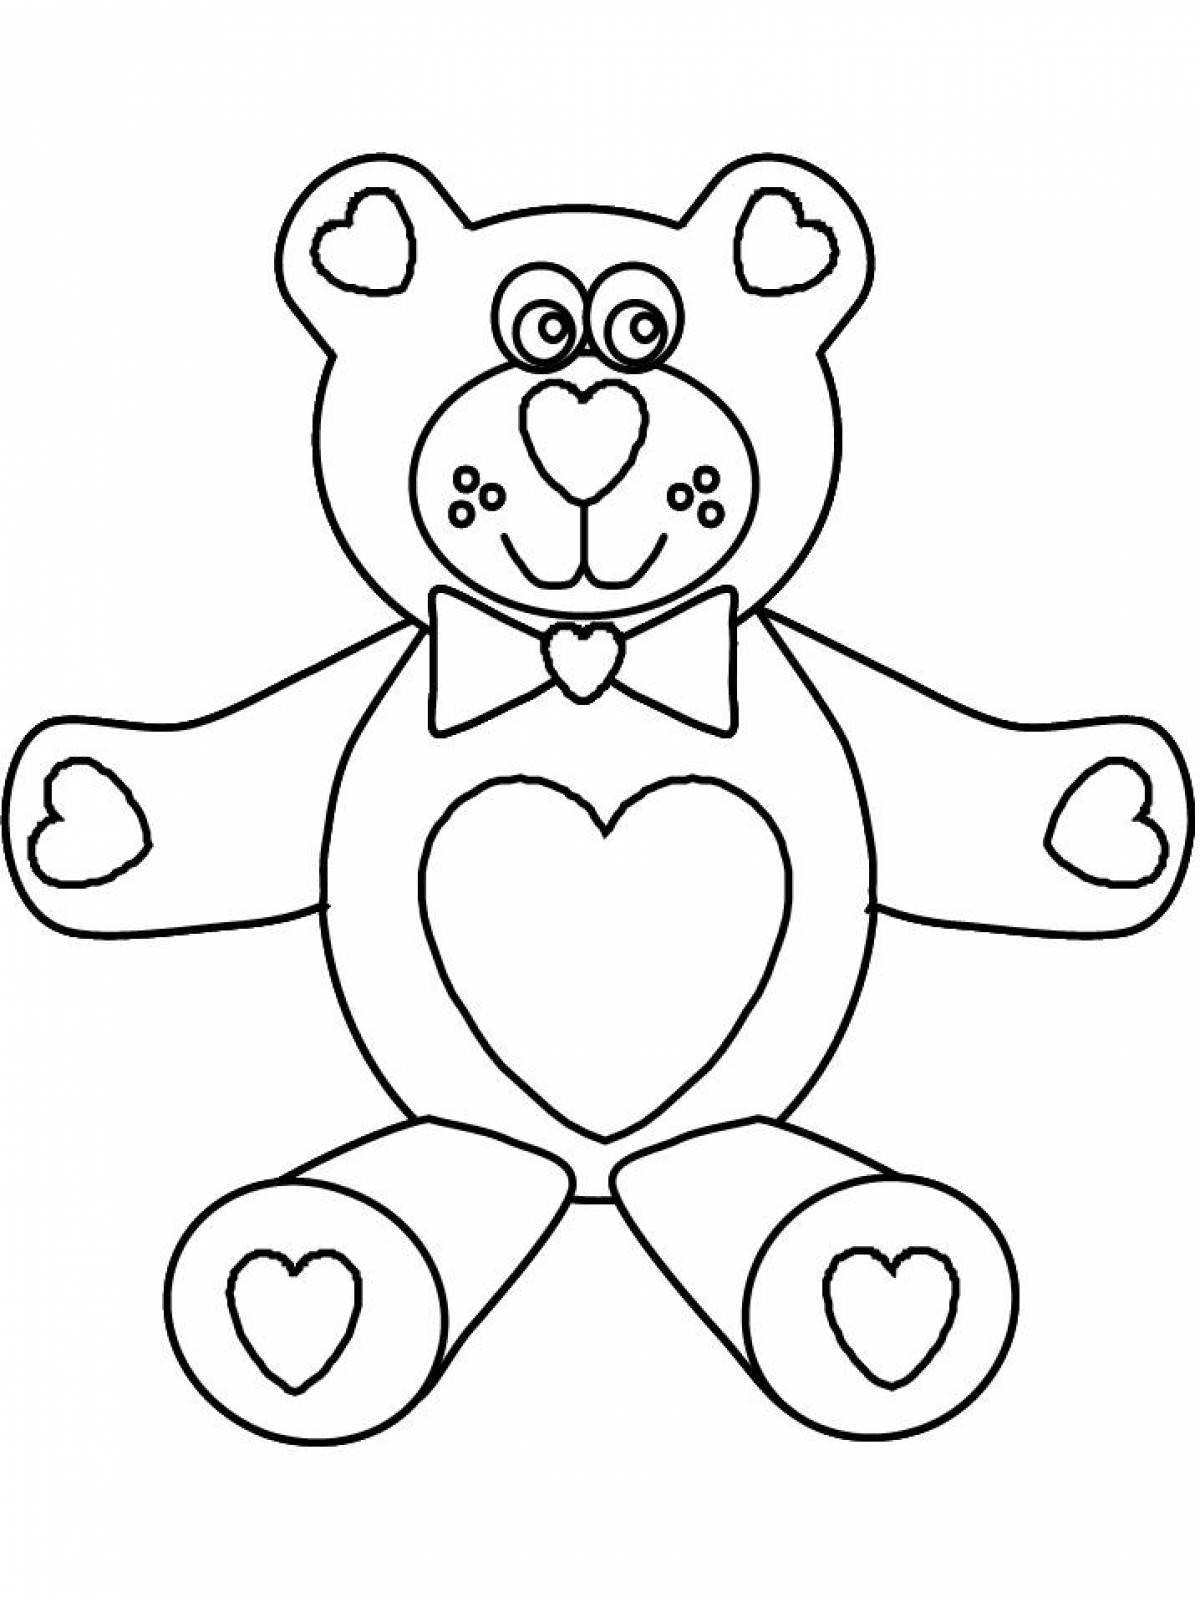 Attractive valera jelly bear coloring pages